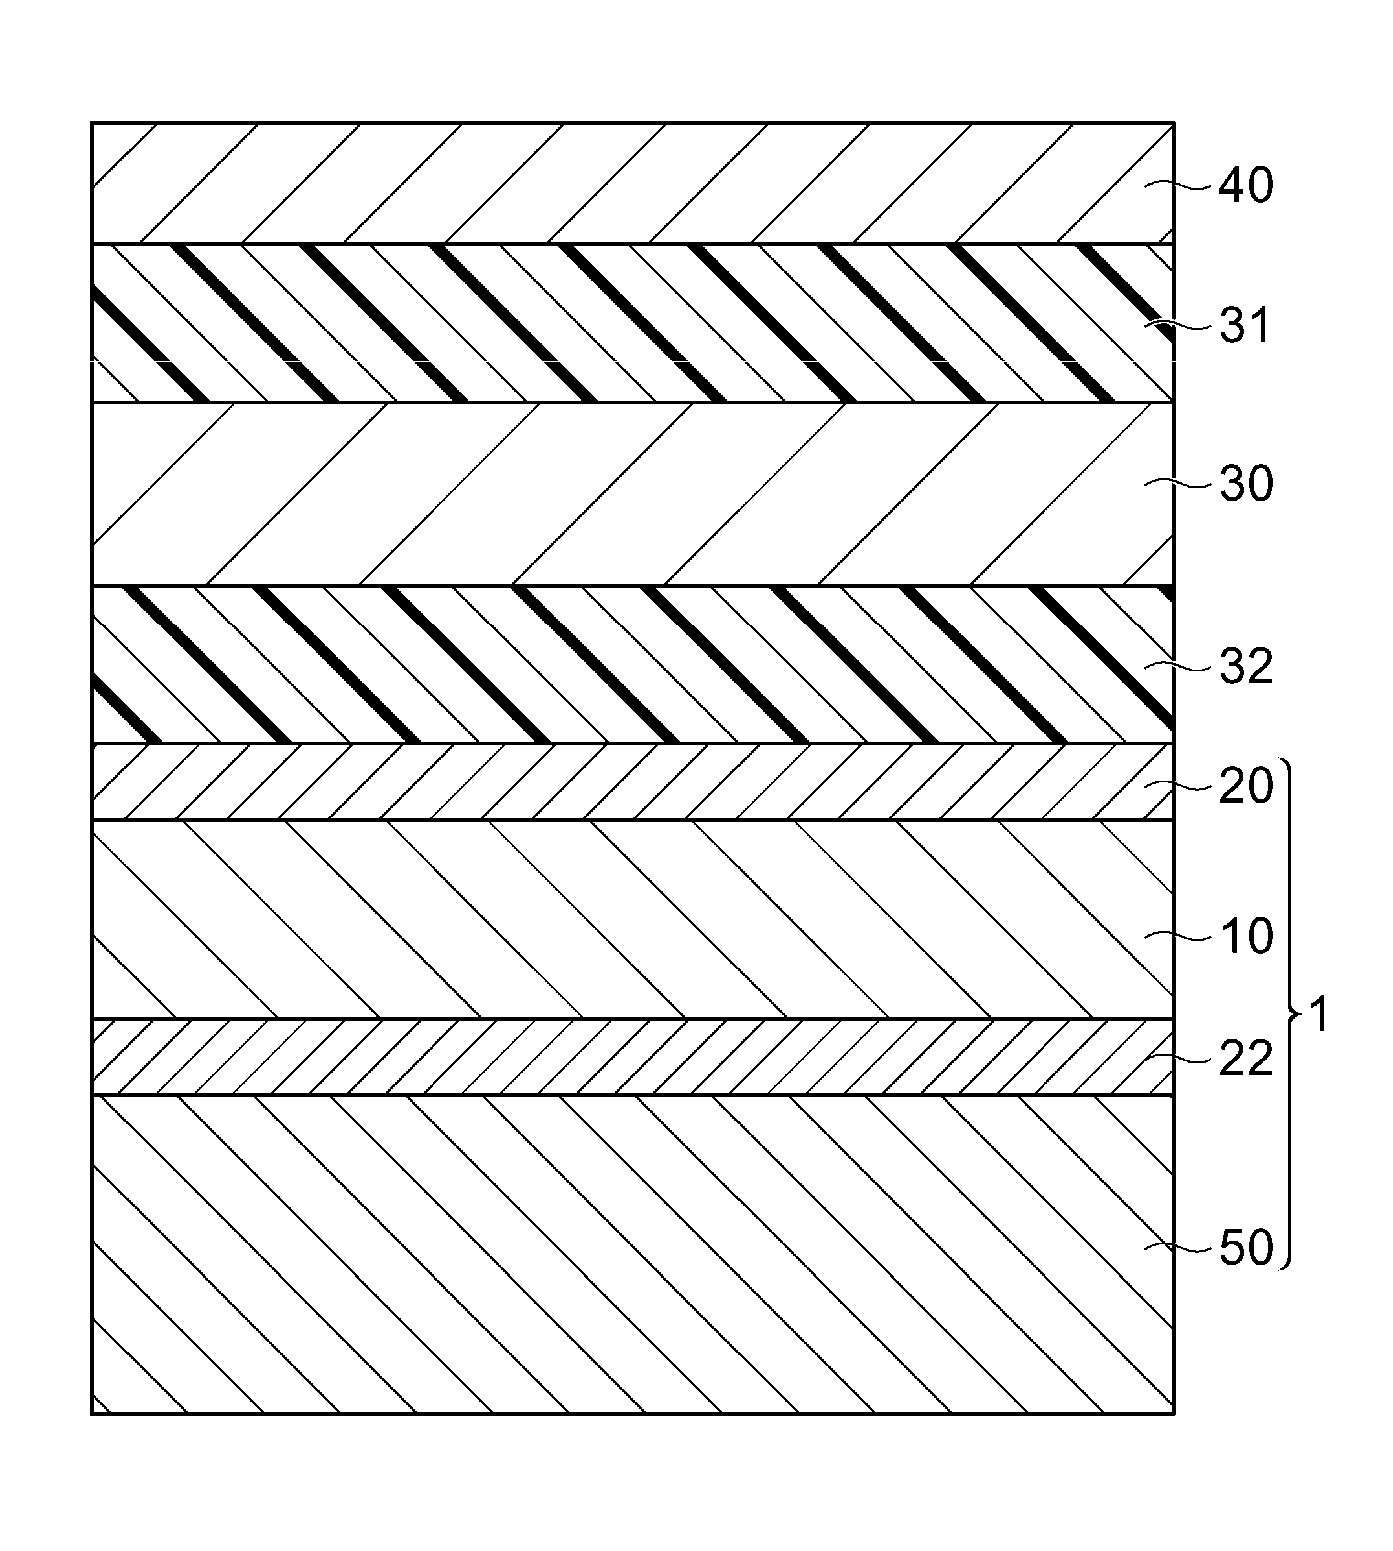 Liquid curable resin composition, method for manufacturing image display device using same, and image display device